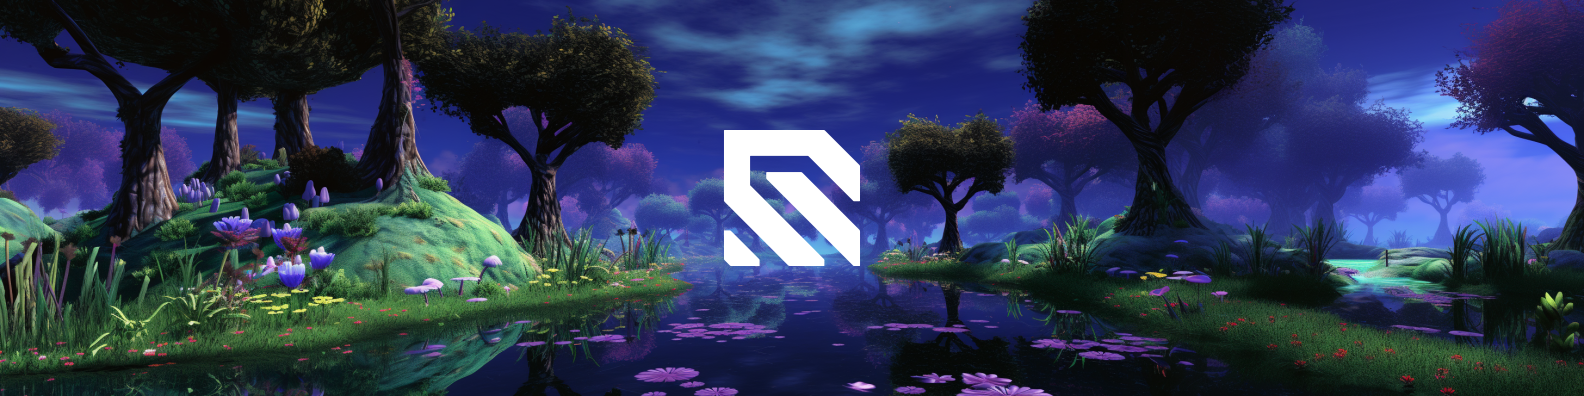 A purple and green digital forest pond landscape with the Wallhack logo in the middle